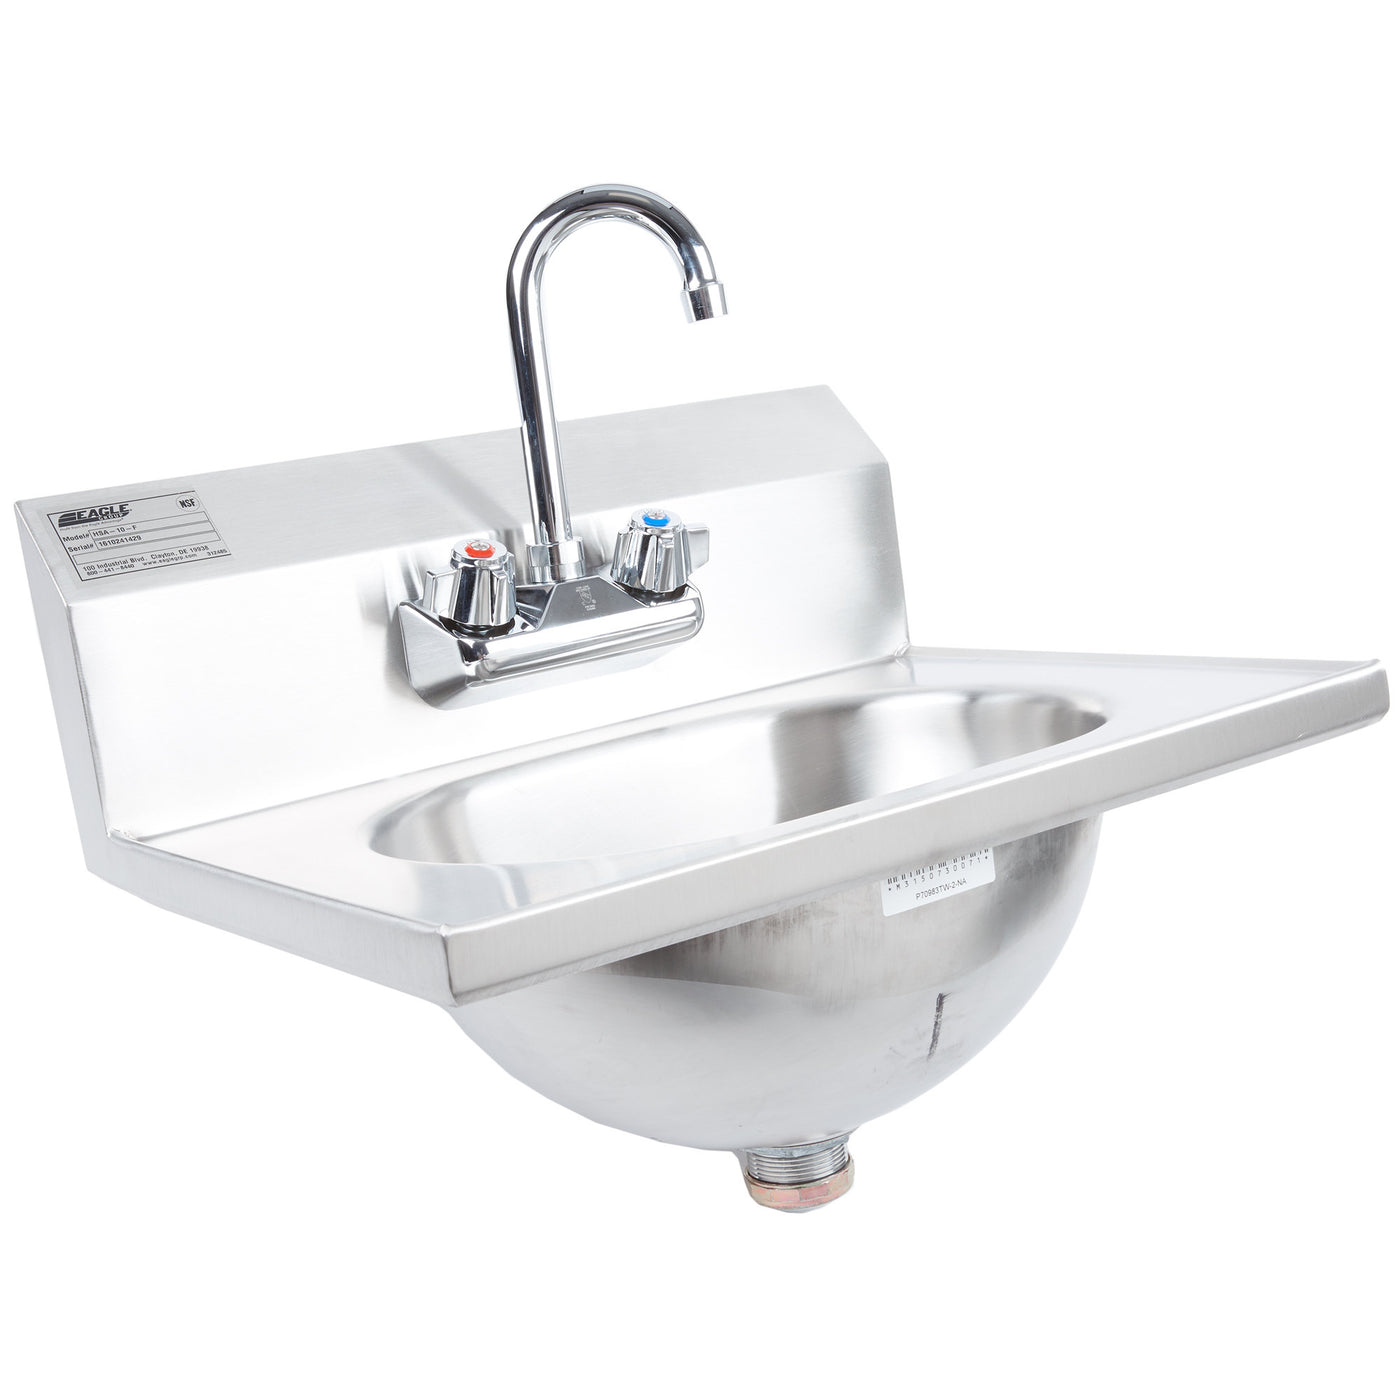 Eagle Group Hsa 10 F 13 5 Hand Sink With Gooseneck Faucet And Basket Drain